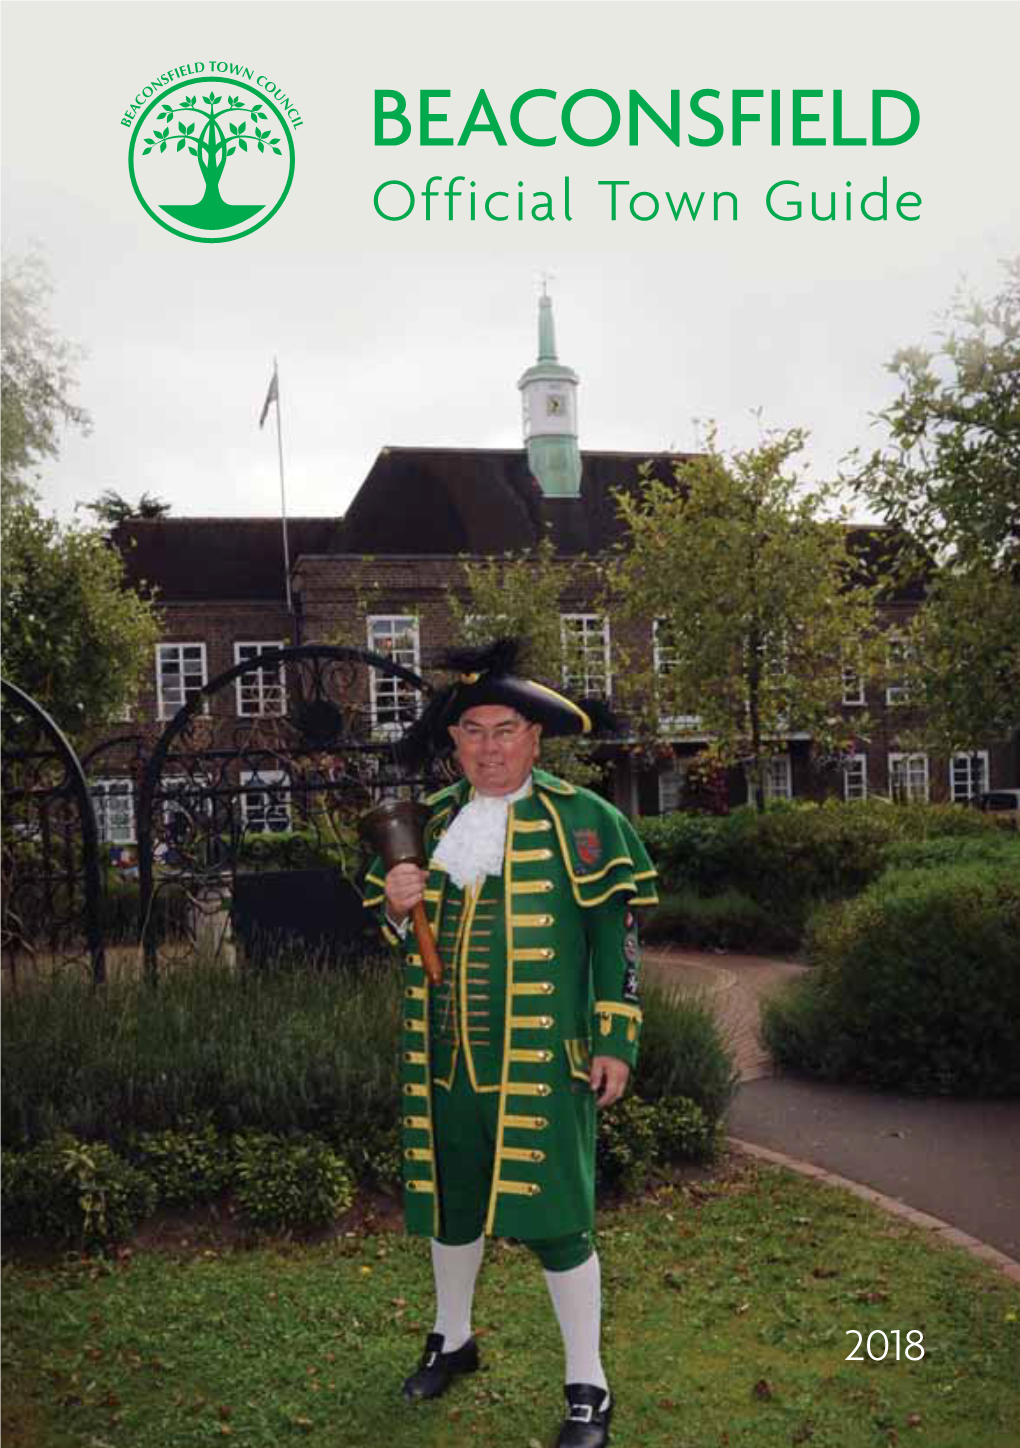 BEACONSFIELD Official Town Guide